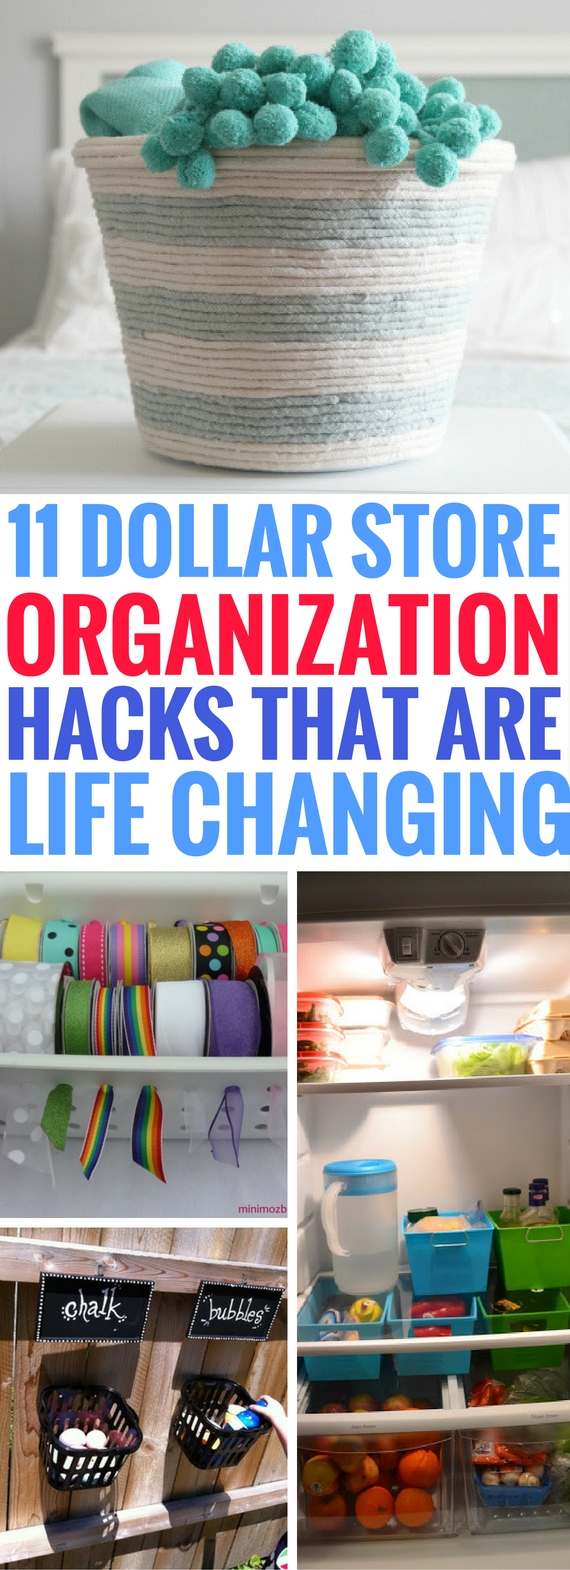 These 11 Dollar Store Organizing Ideas for your home are AWESOME! I can't believe how CHEAP and easy they are to do. Really great ways to make sure your home stays organized. Can't wait to try them all!